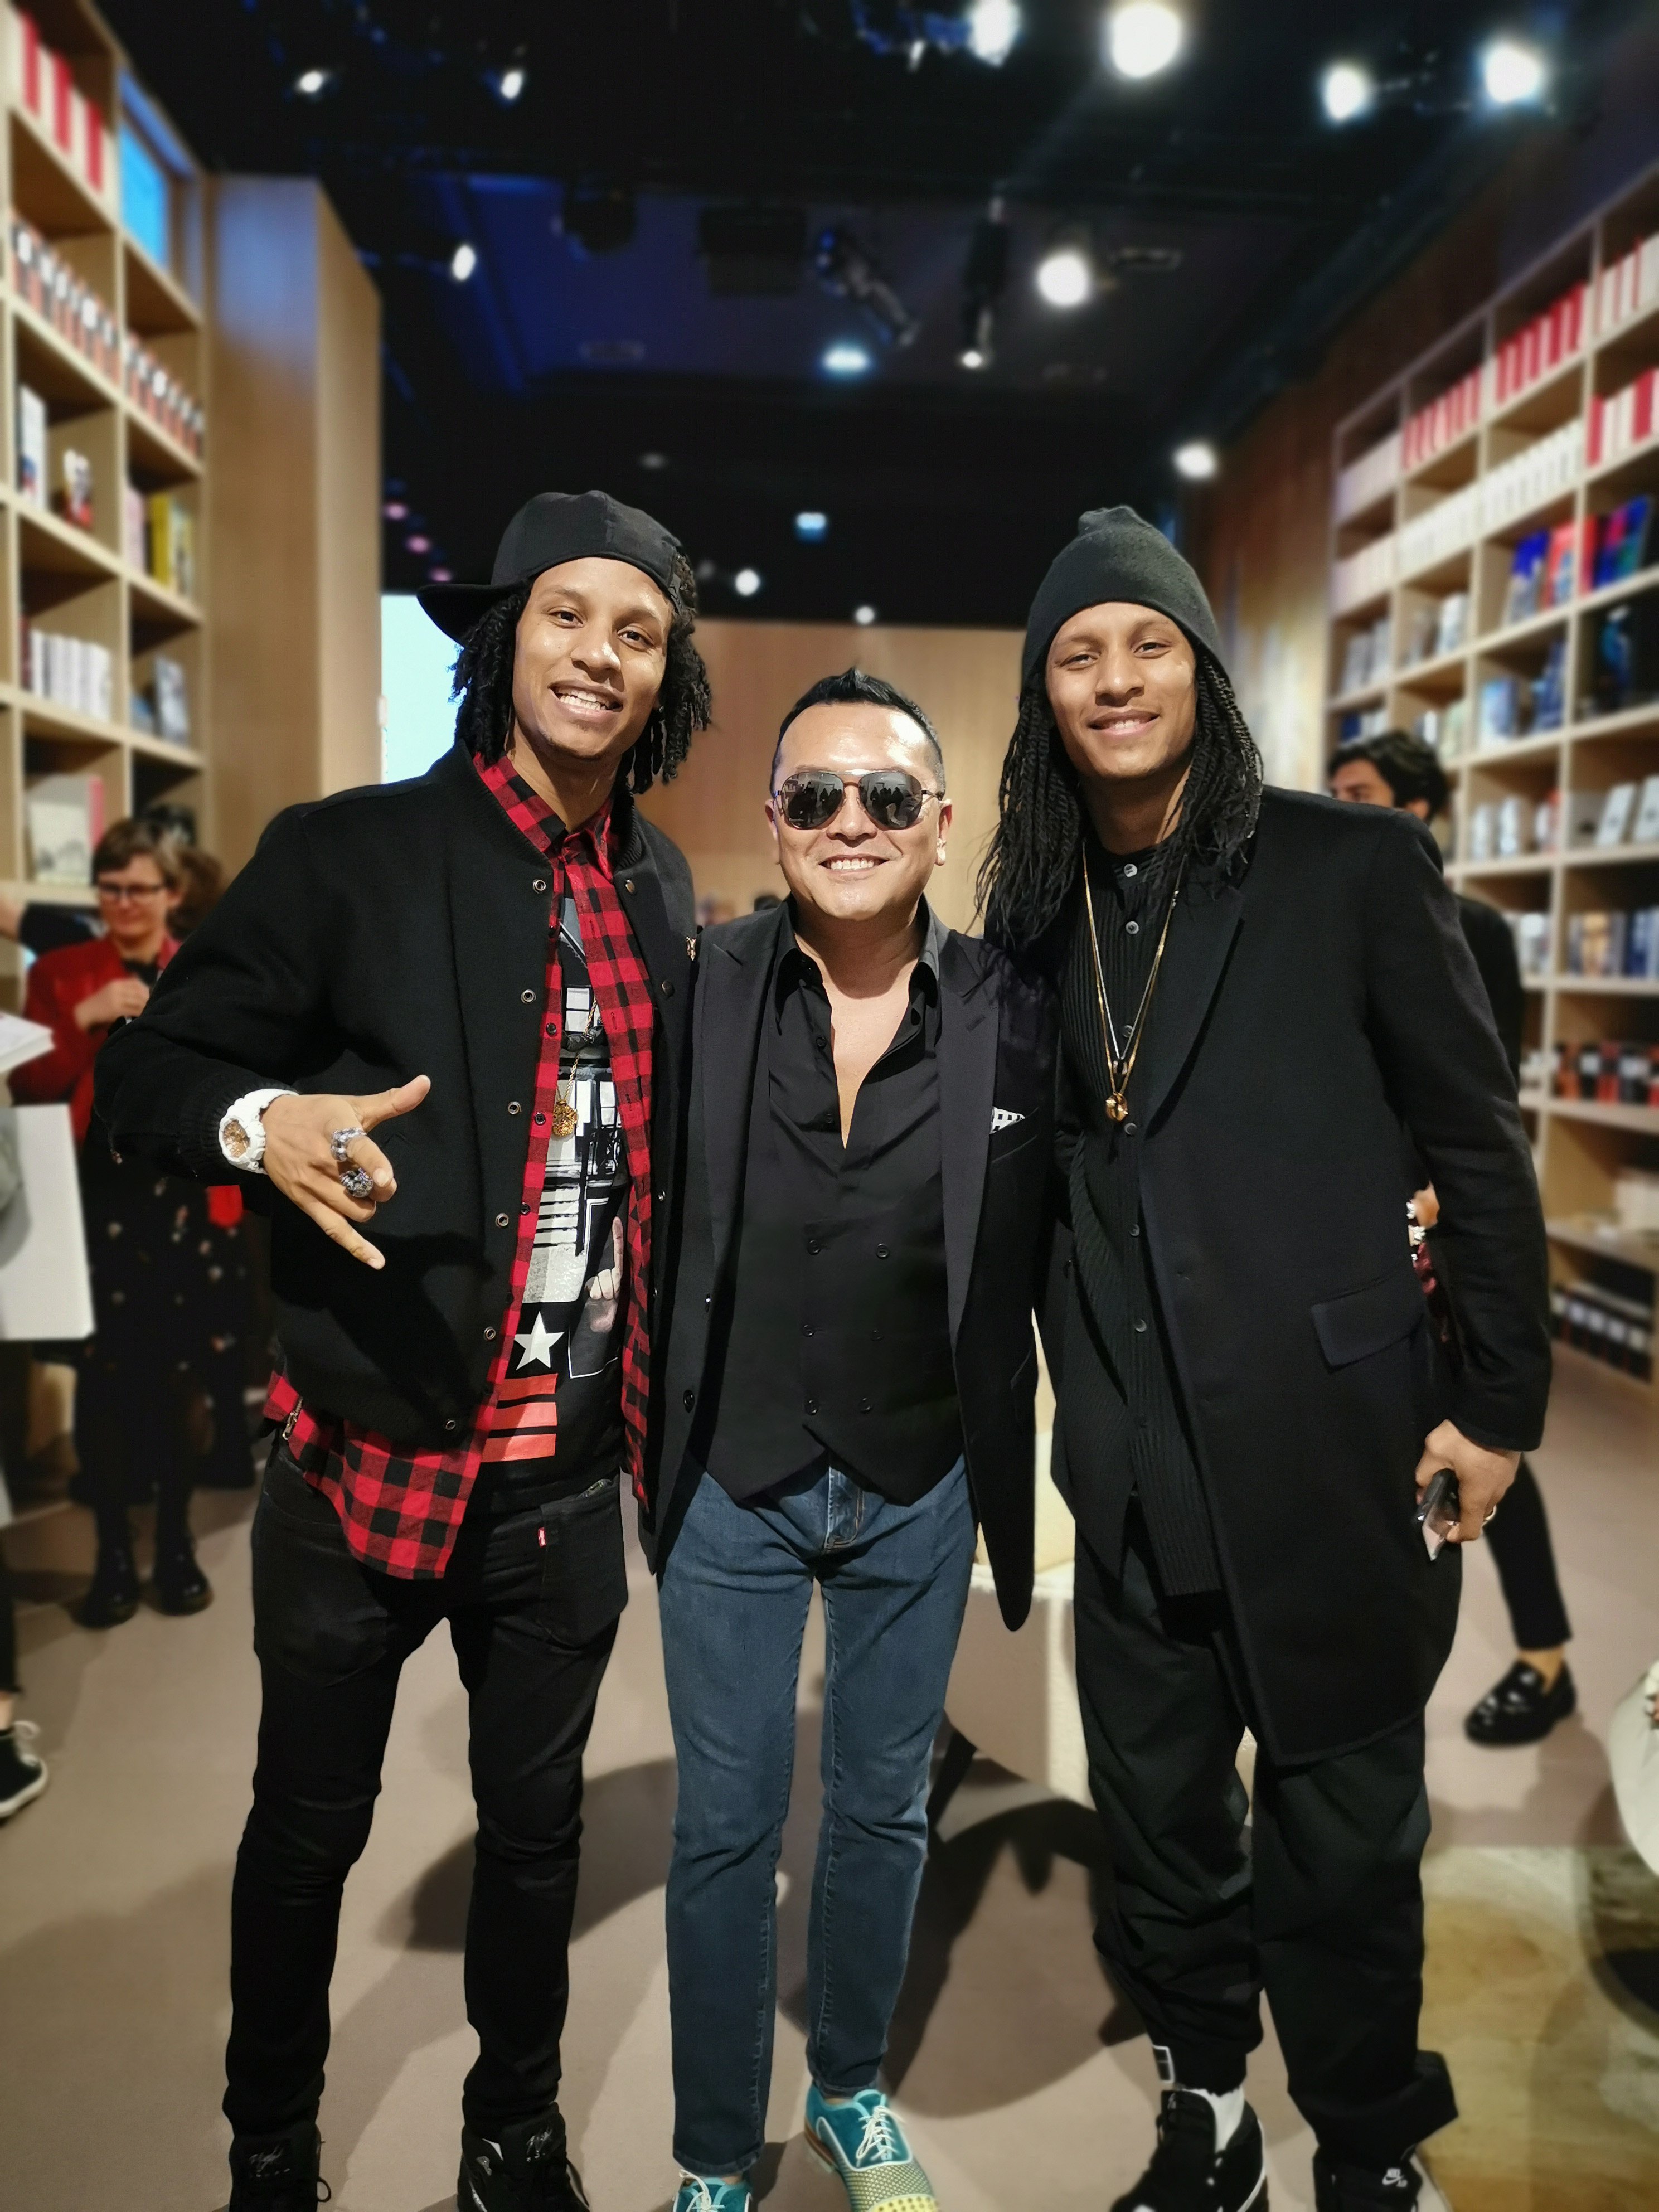 Gordon Lam with Larry Bourgeois and Laurent Bourgeois from Les Twins